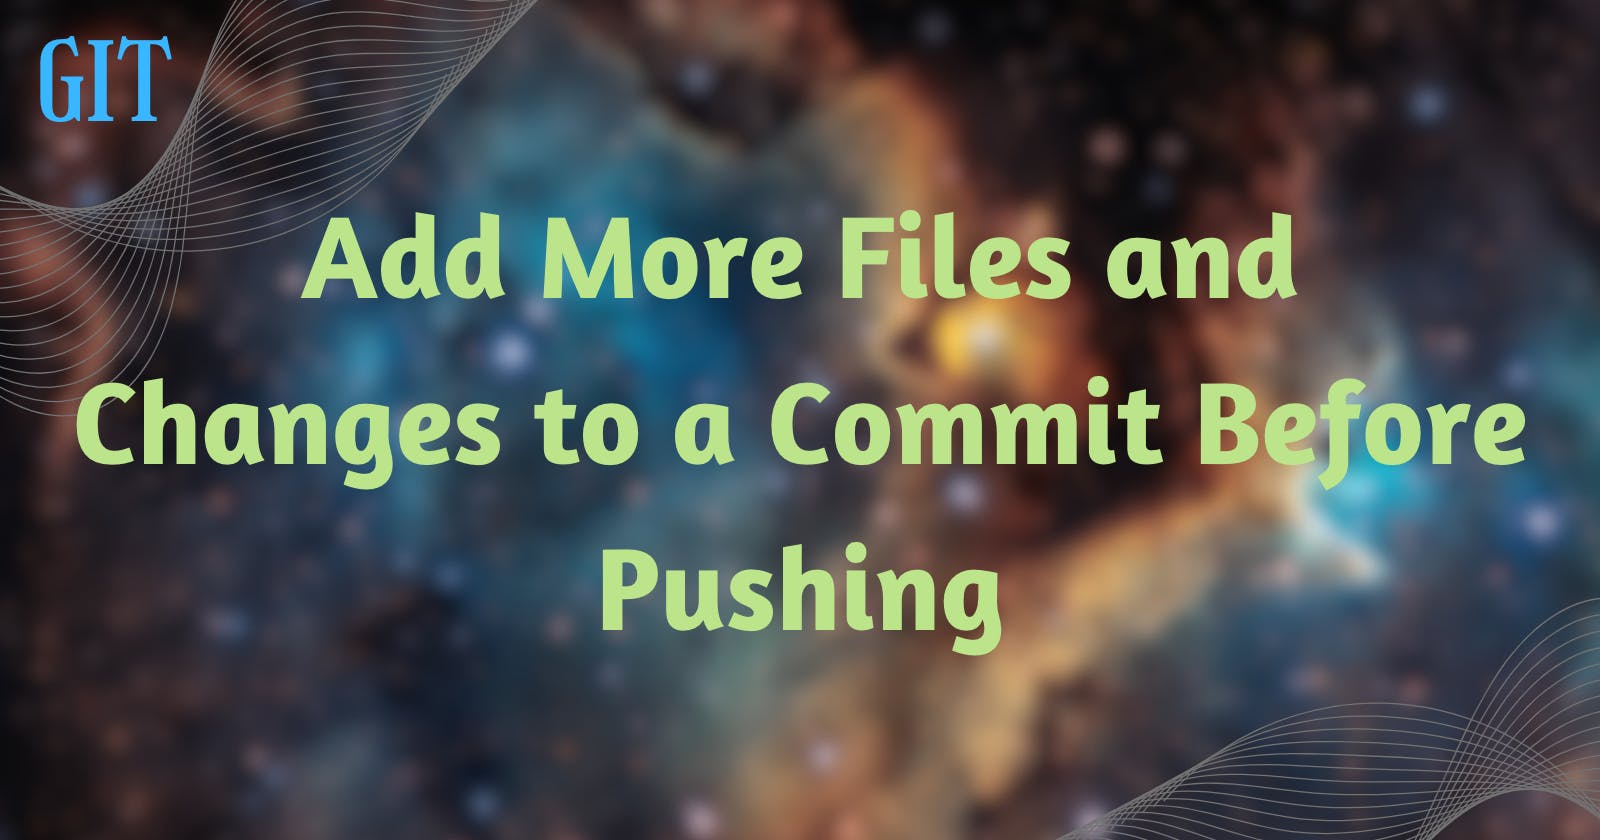 Add More Files and Changes to a Commit Before Pushing